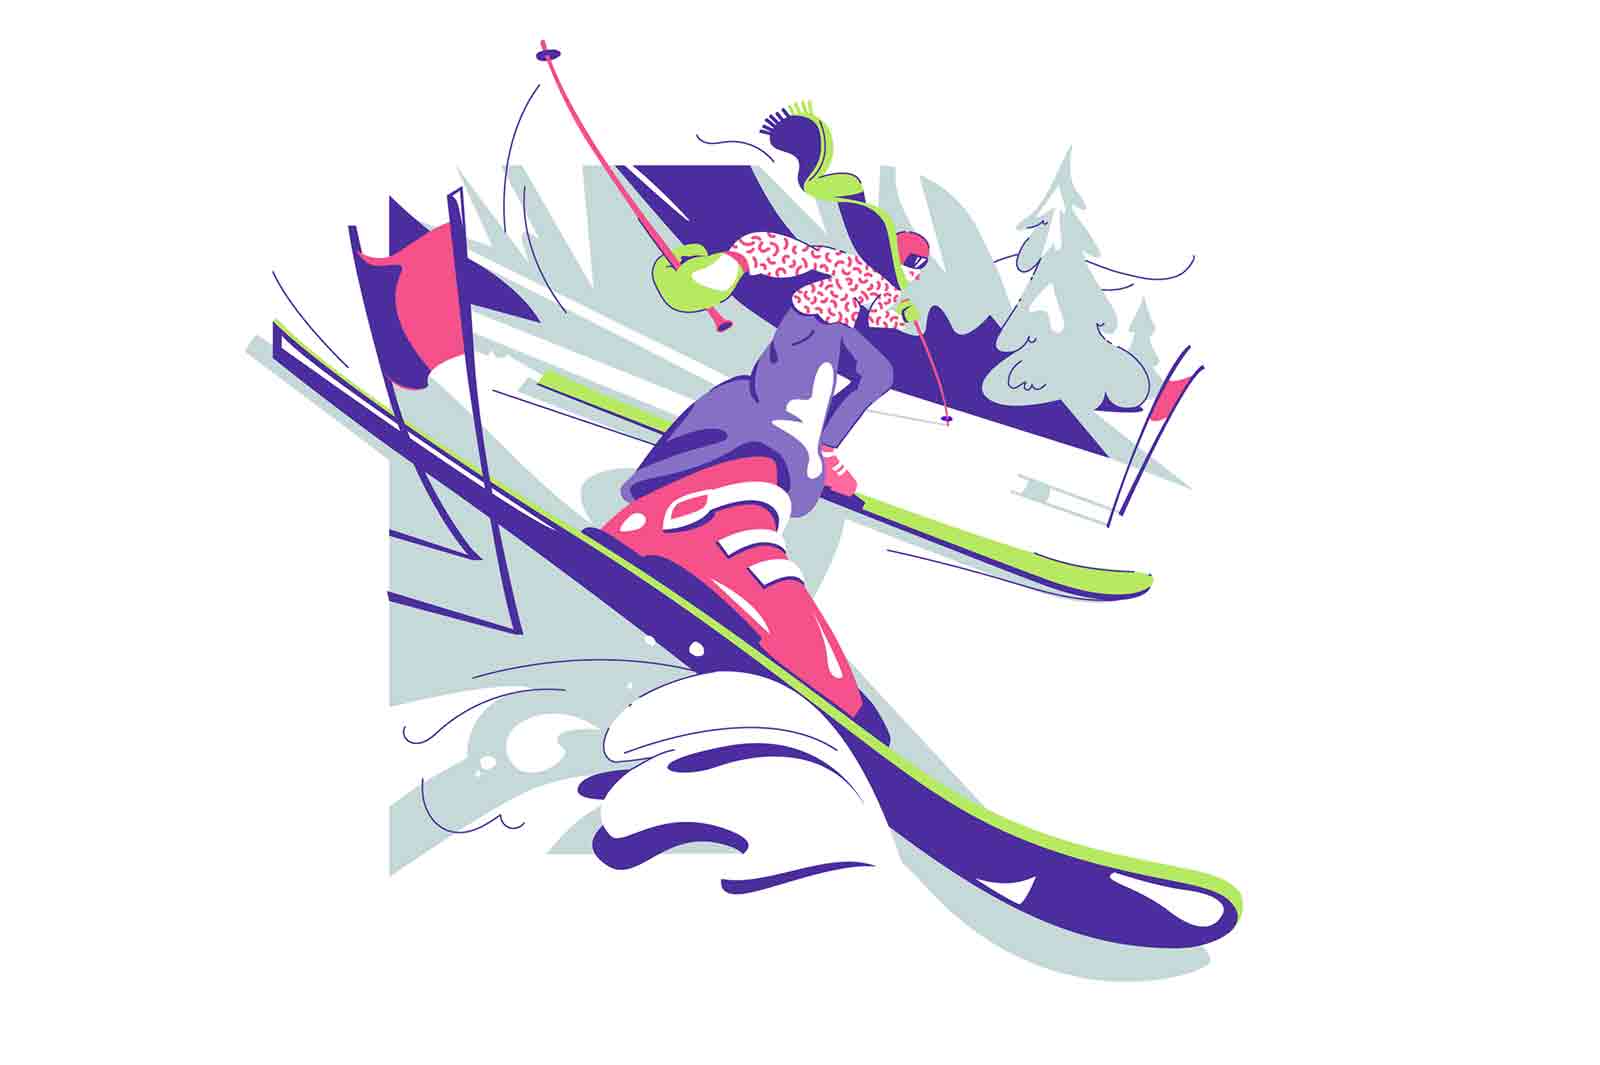 Skiing guy character in mountains on ski tool vector illustration. Advanced skier on downhill flat style. Winter sport activity concept